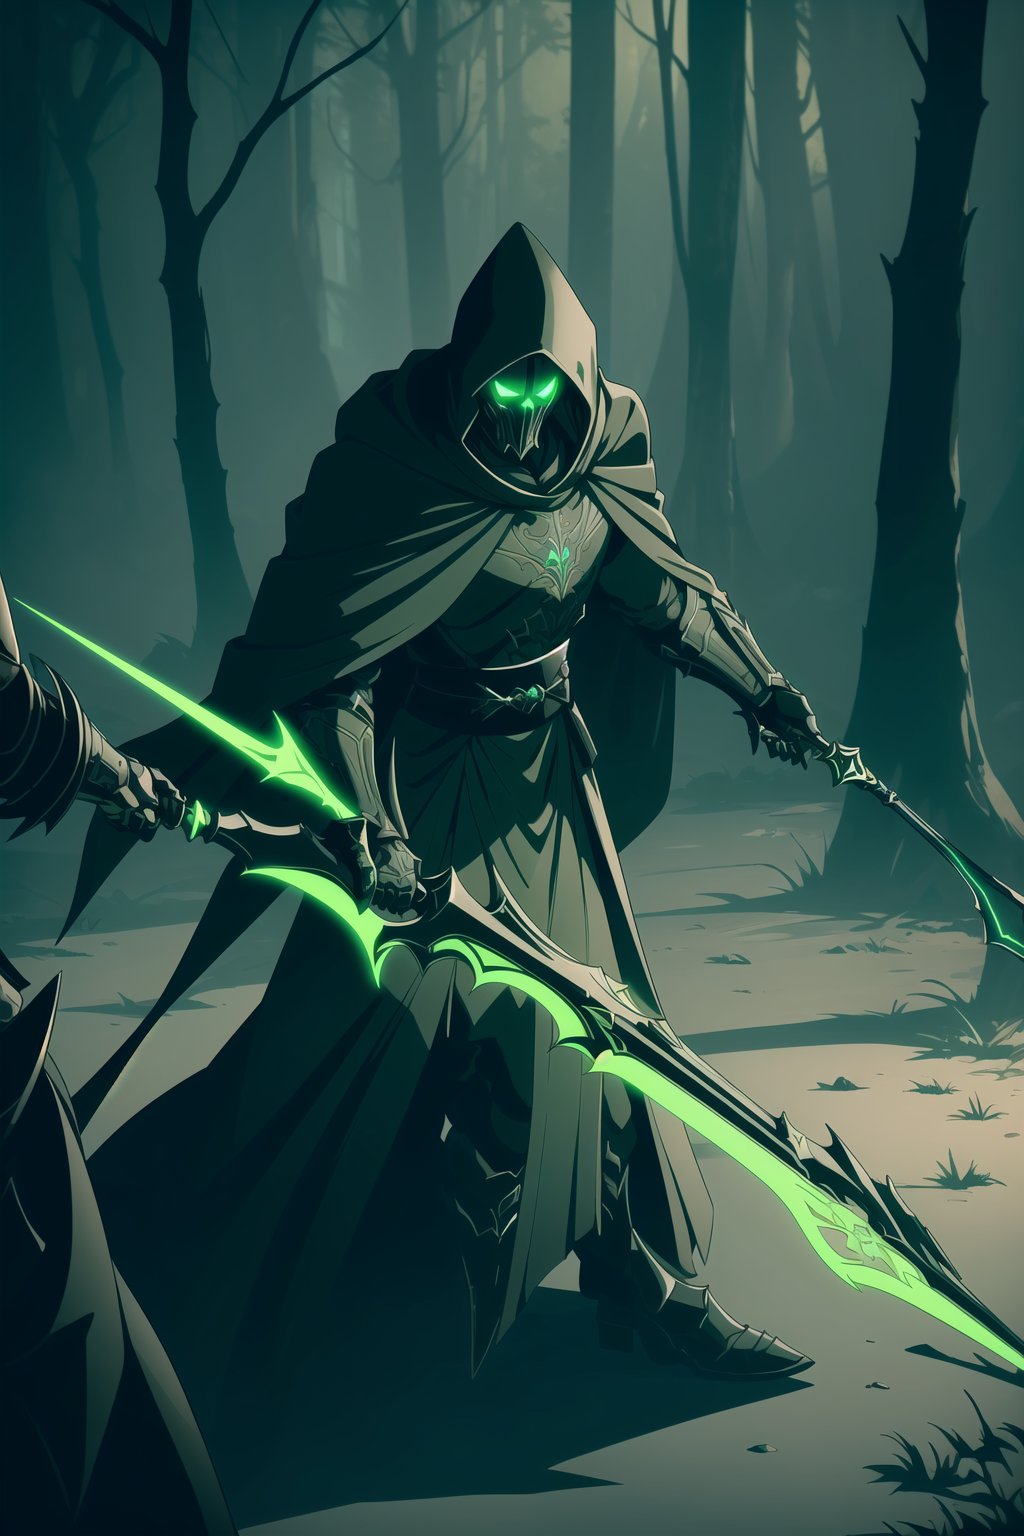 (Masterpiece, Best Quality), (Grim Reaper in Warframe Style Armor), (Masculine Appearance:1.4), (Muscular Frame Build:1.2), (Glowing Green Eyes), (Wearing Green and Black Grim Reaper-Themed Armored Robe, Black Hood, and Black Flowing Cloak:1.4), (Wielding a Green-Glowing Scythe:1.4) (Foggy Forest at Night:1.4), (Action Pose:1.4), Centered, (Half Body Shot:1.4), (From Front Shot:1.2), Insane Details, Intricate Face Detail, Intricate Hand Details, Cinematic Shot and Lighting, Realistic and Vibrant Colors, Sharp Focus, Ultra Detailed, Realistic Images, Depth of Field, Incredibly Realistic Environment and Scene, Master Composition and Cinematography, castlevania style,castlevania style,WARFRAME